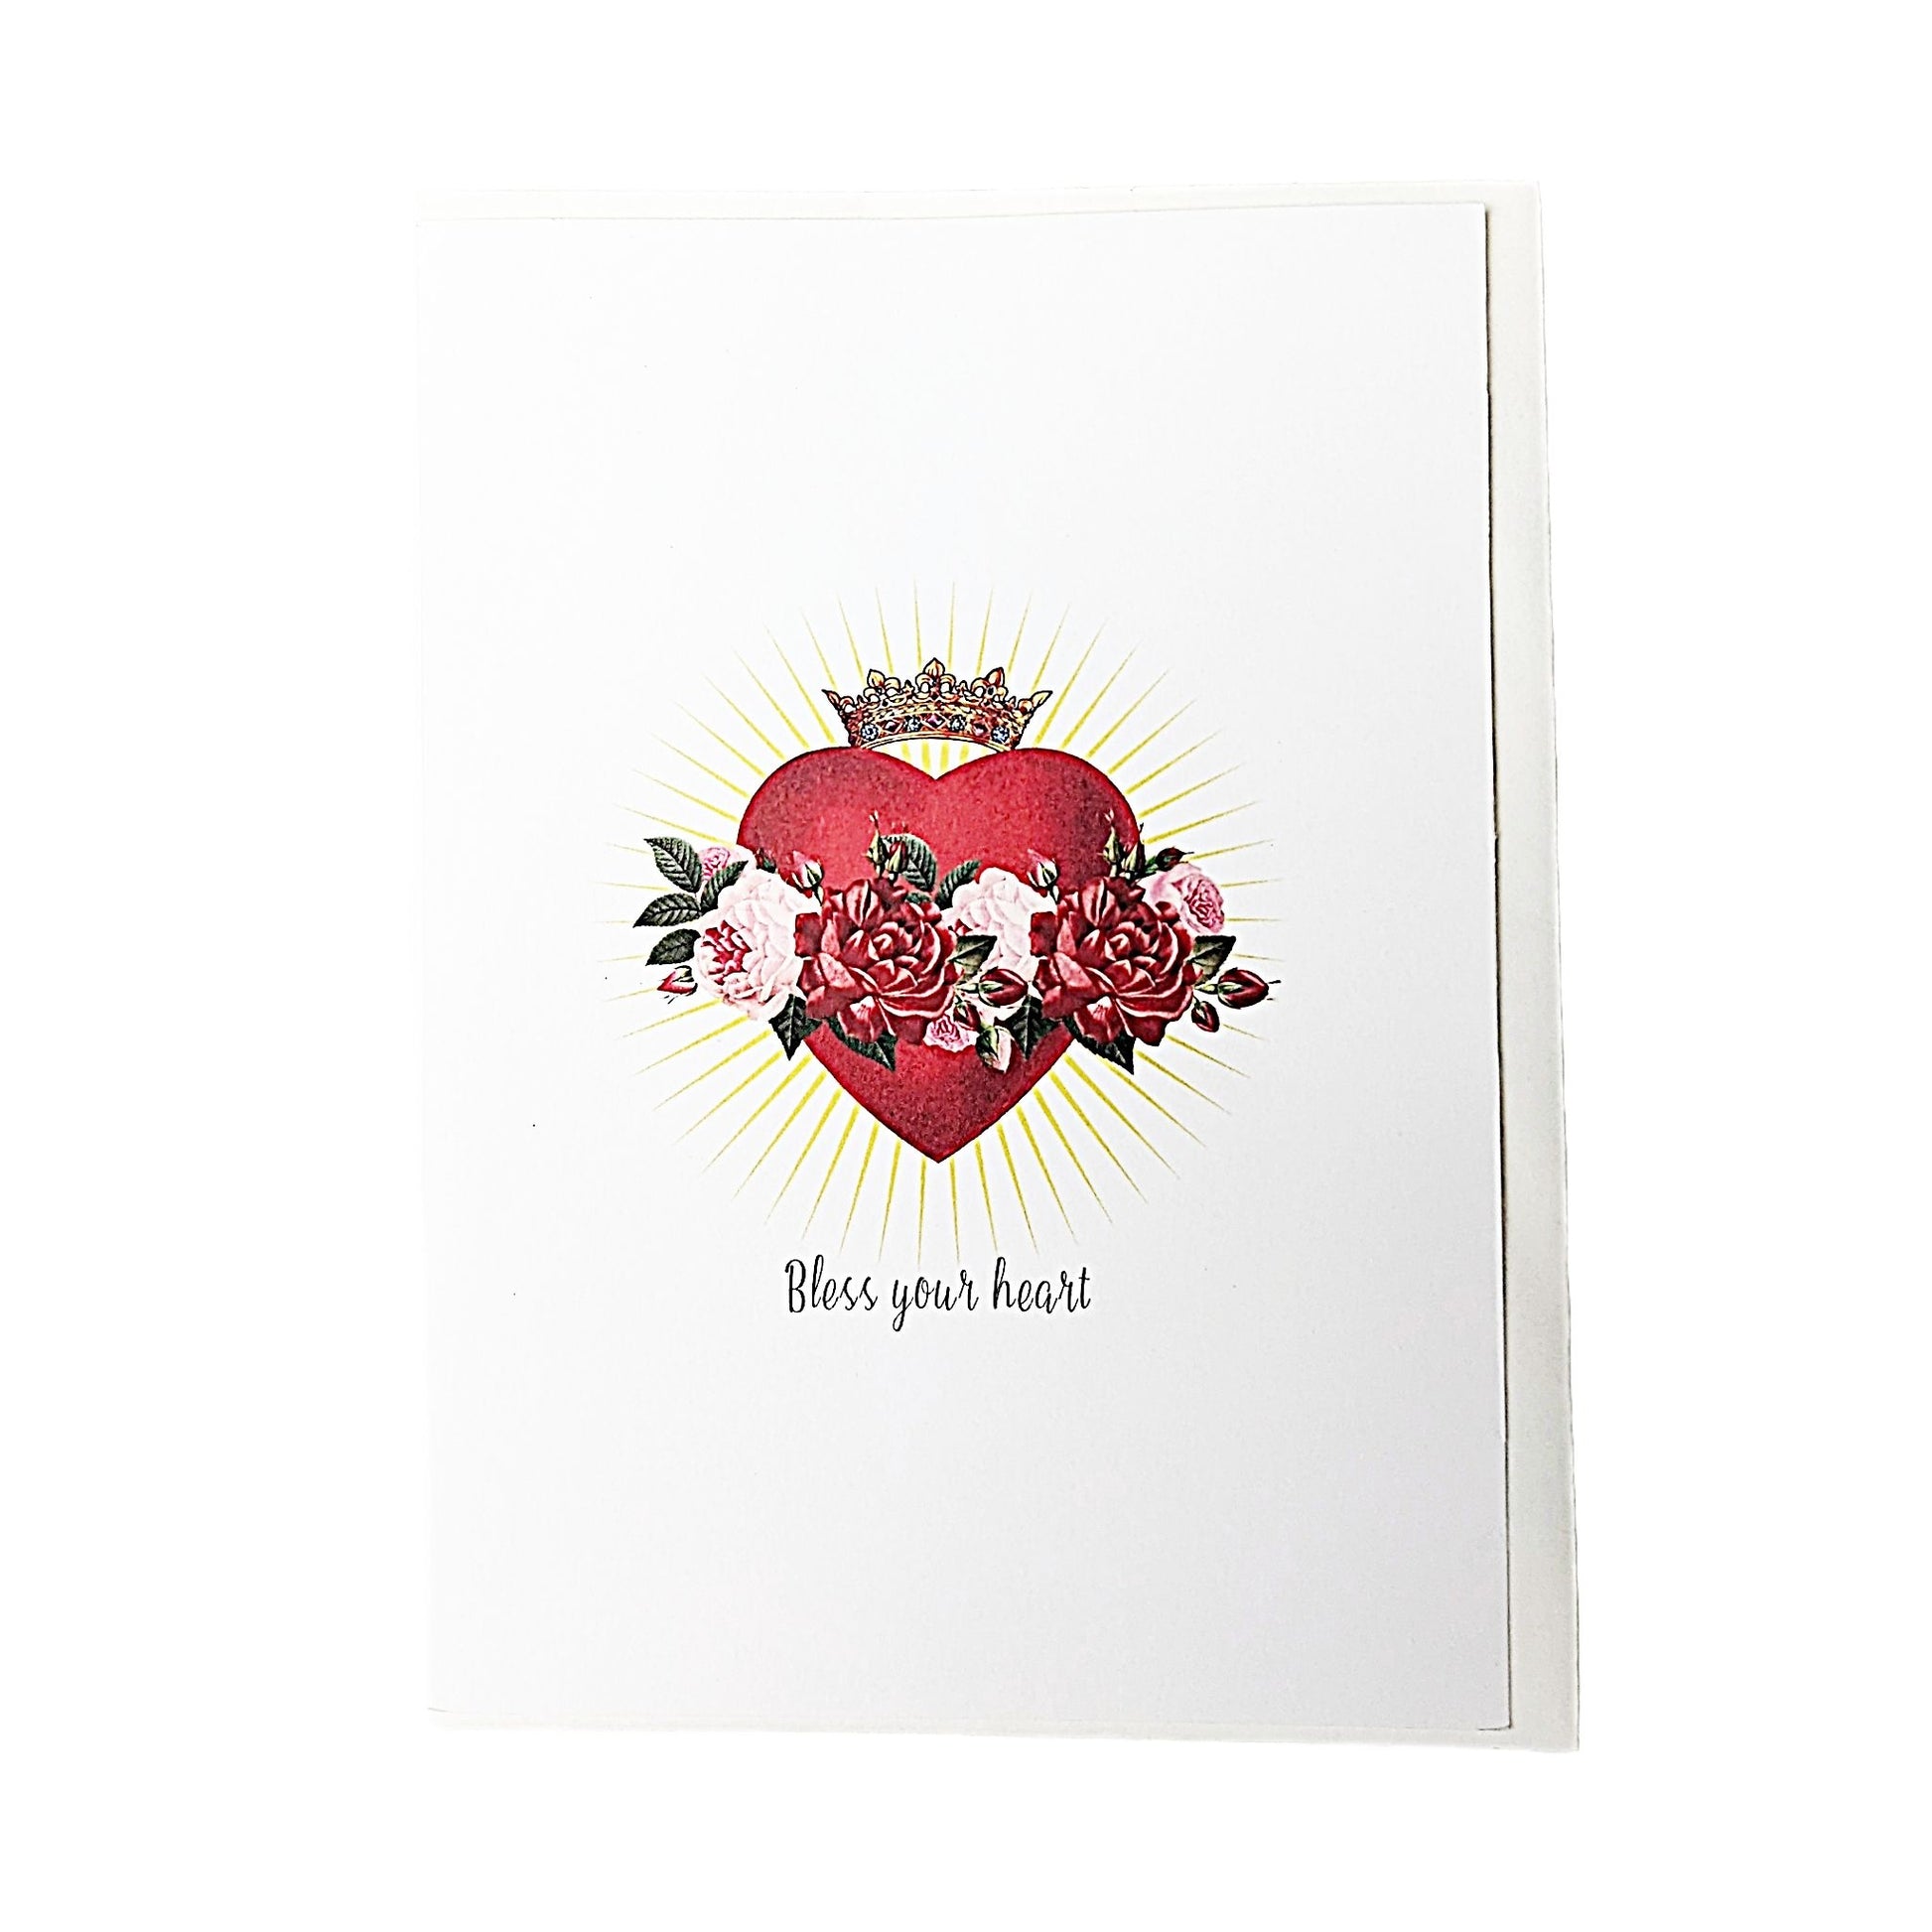 "Bless your Heart" Greeting Card with a beautiful heart centerpiece